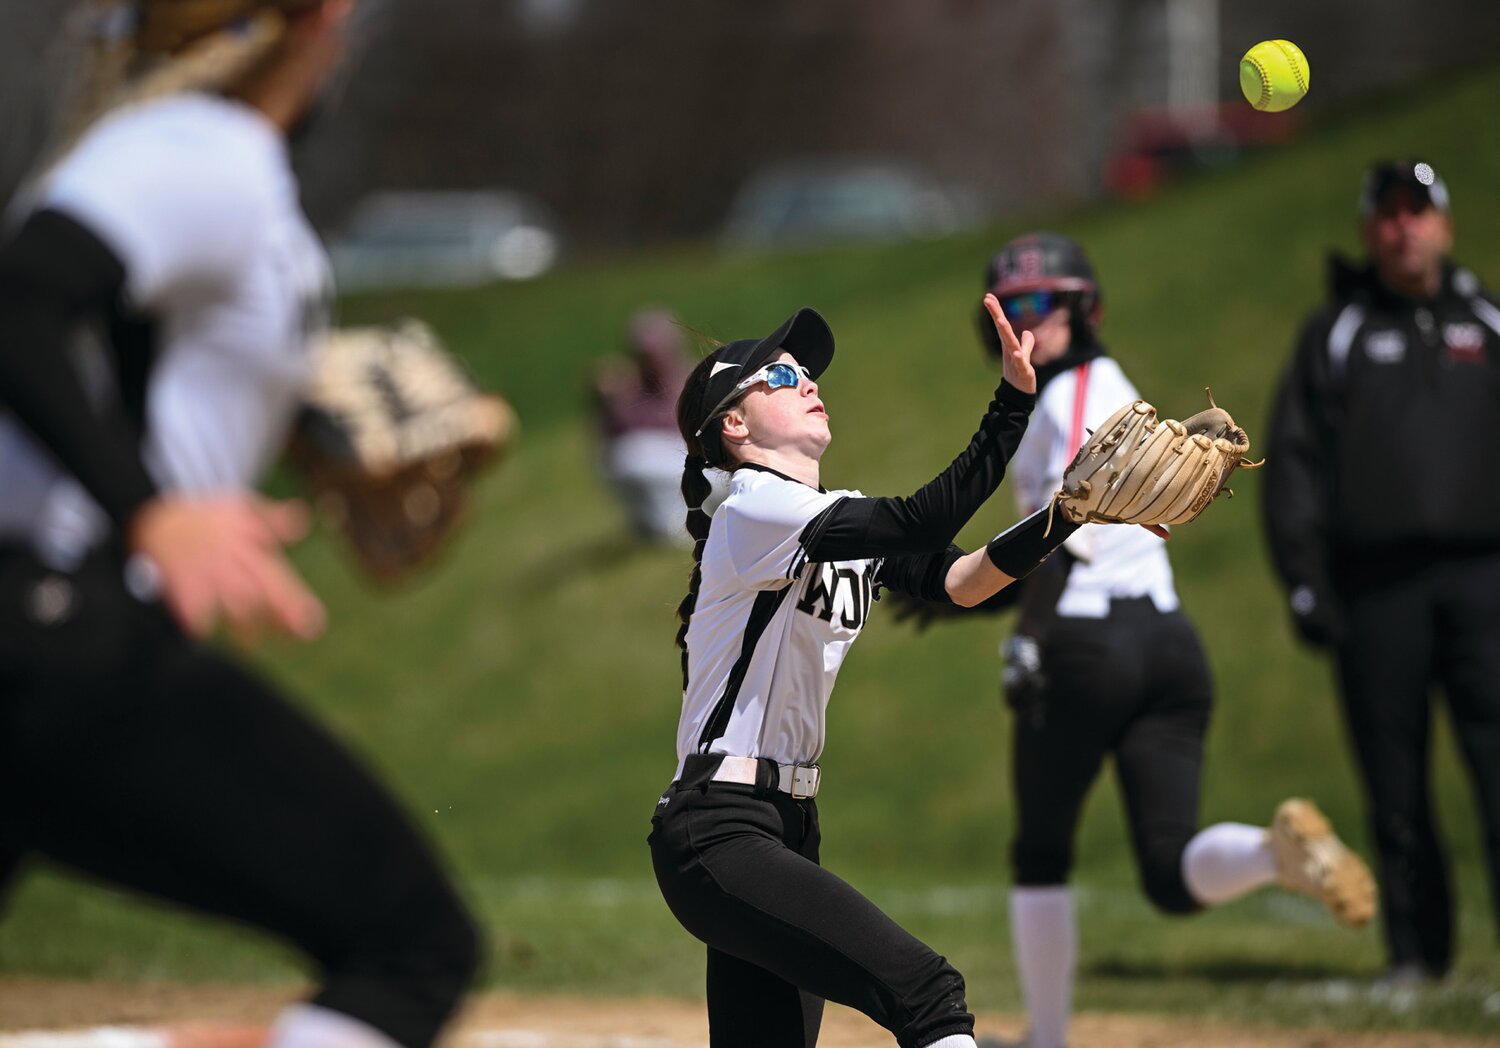 Archbishop Wood’s Maura Yoos catches an infield popup during the bottom of the fifth inning.